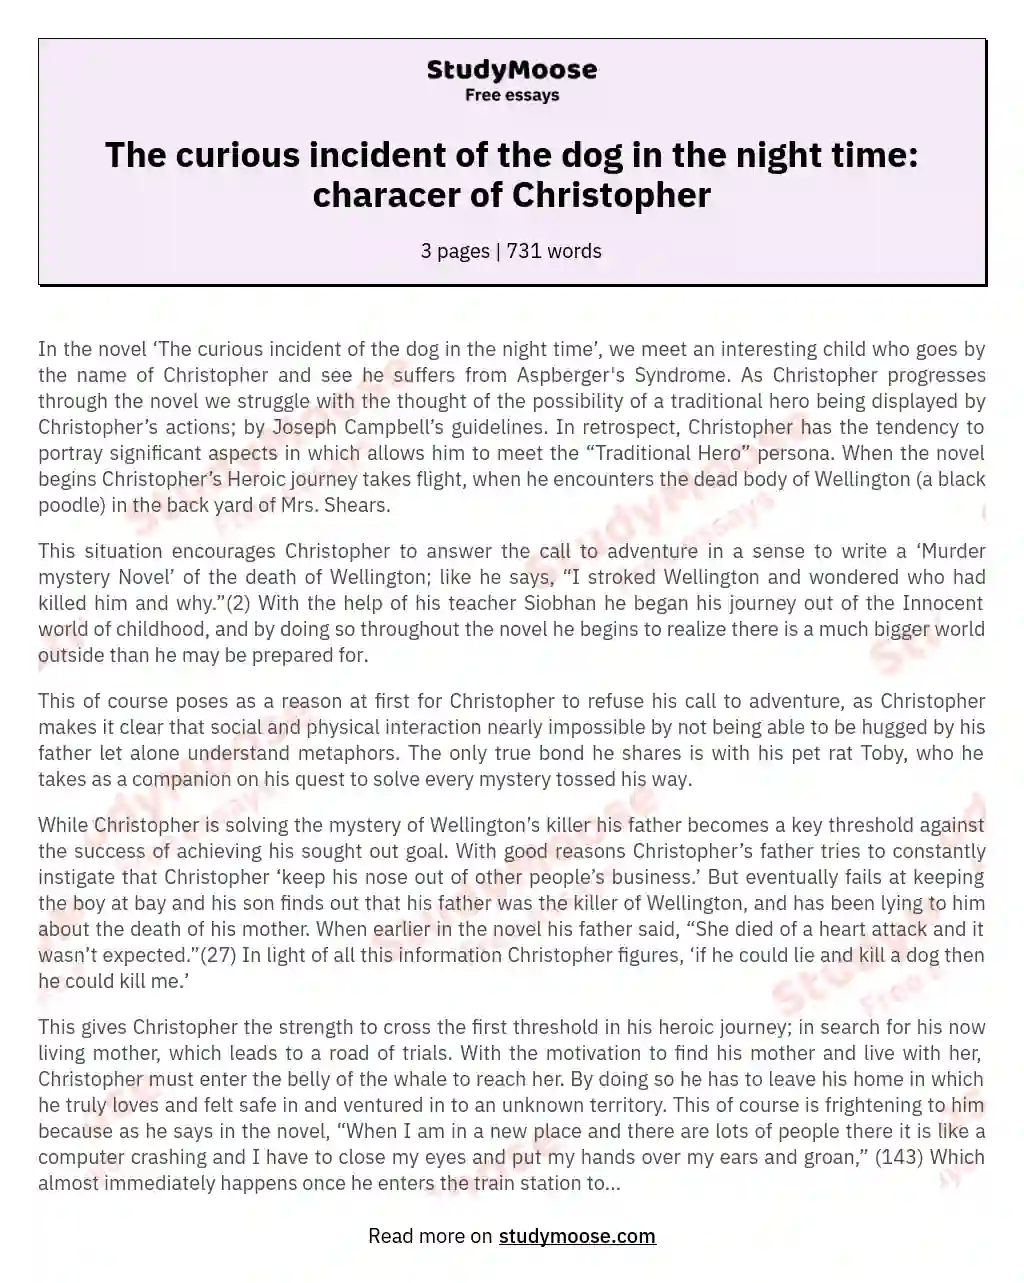 The curious incident of the dog in the night time: characer of Christopher